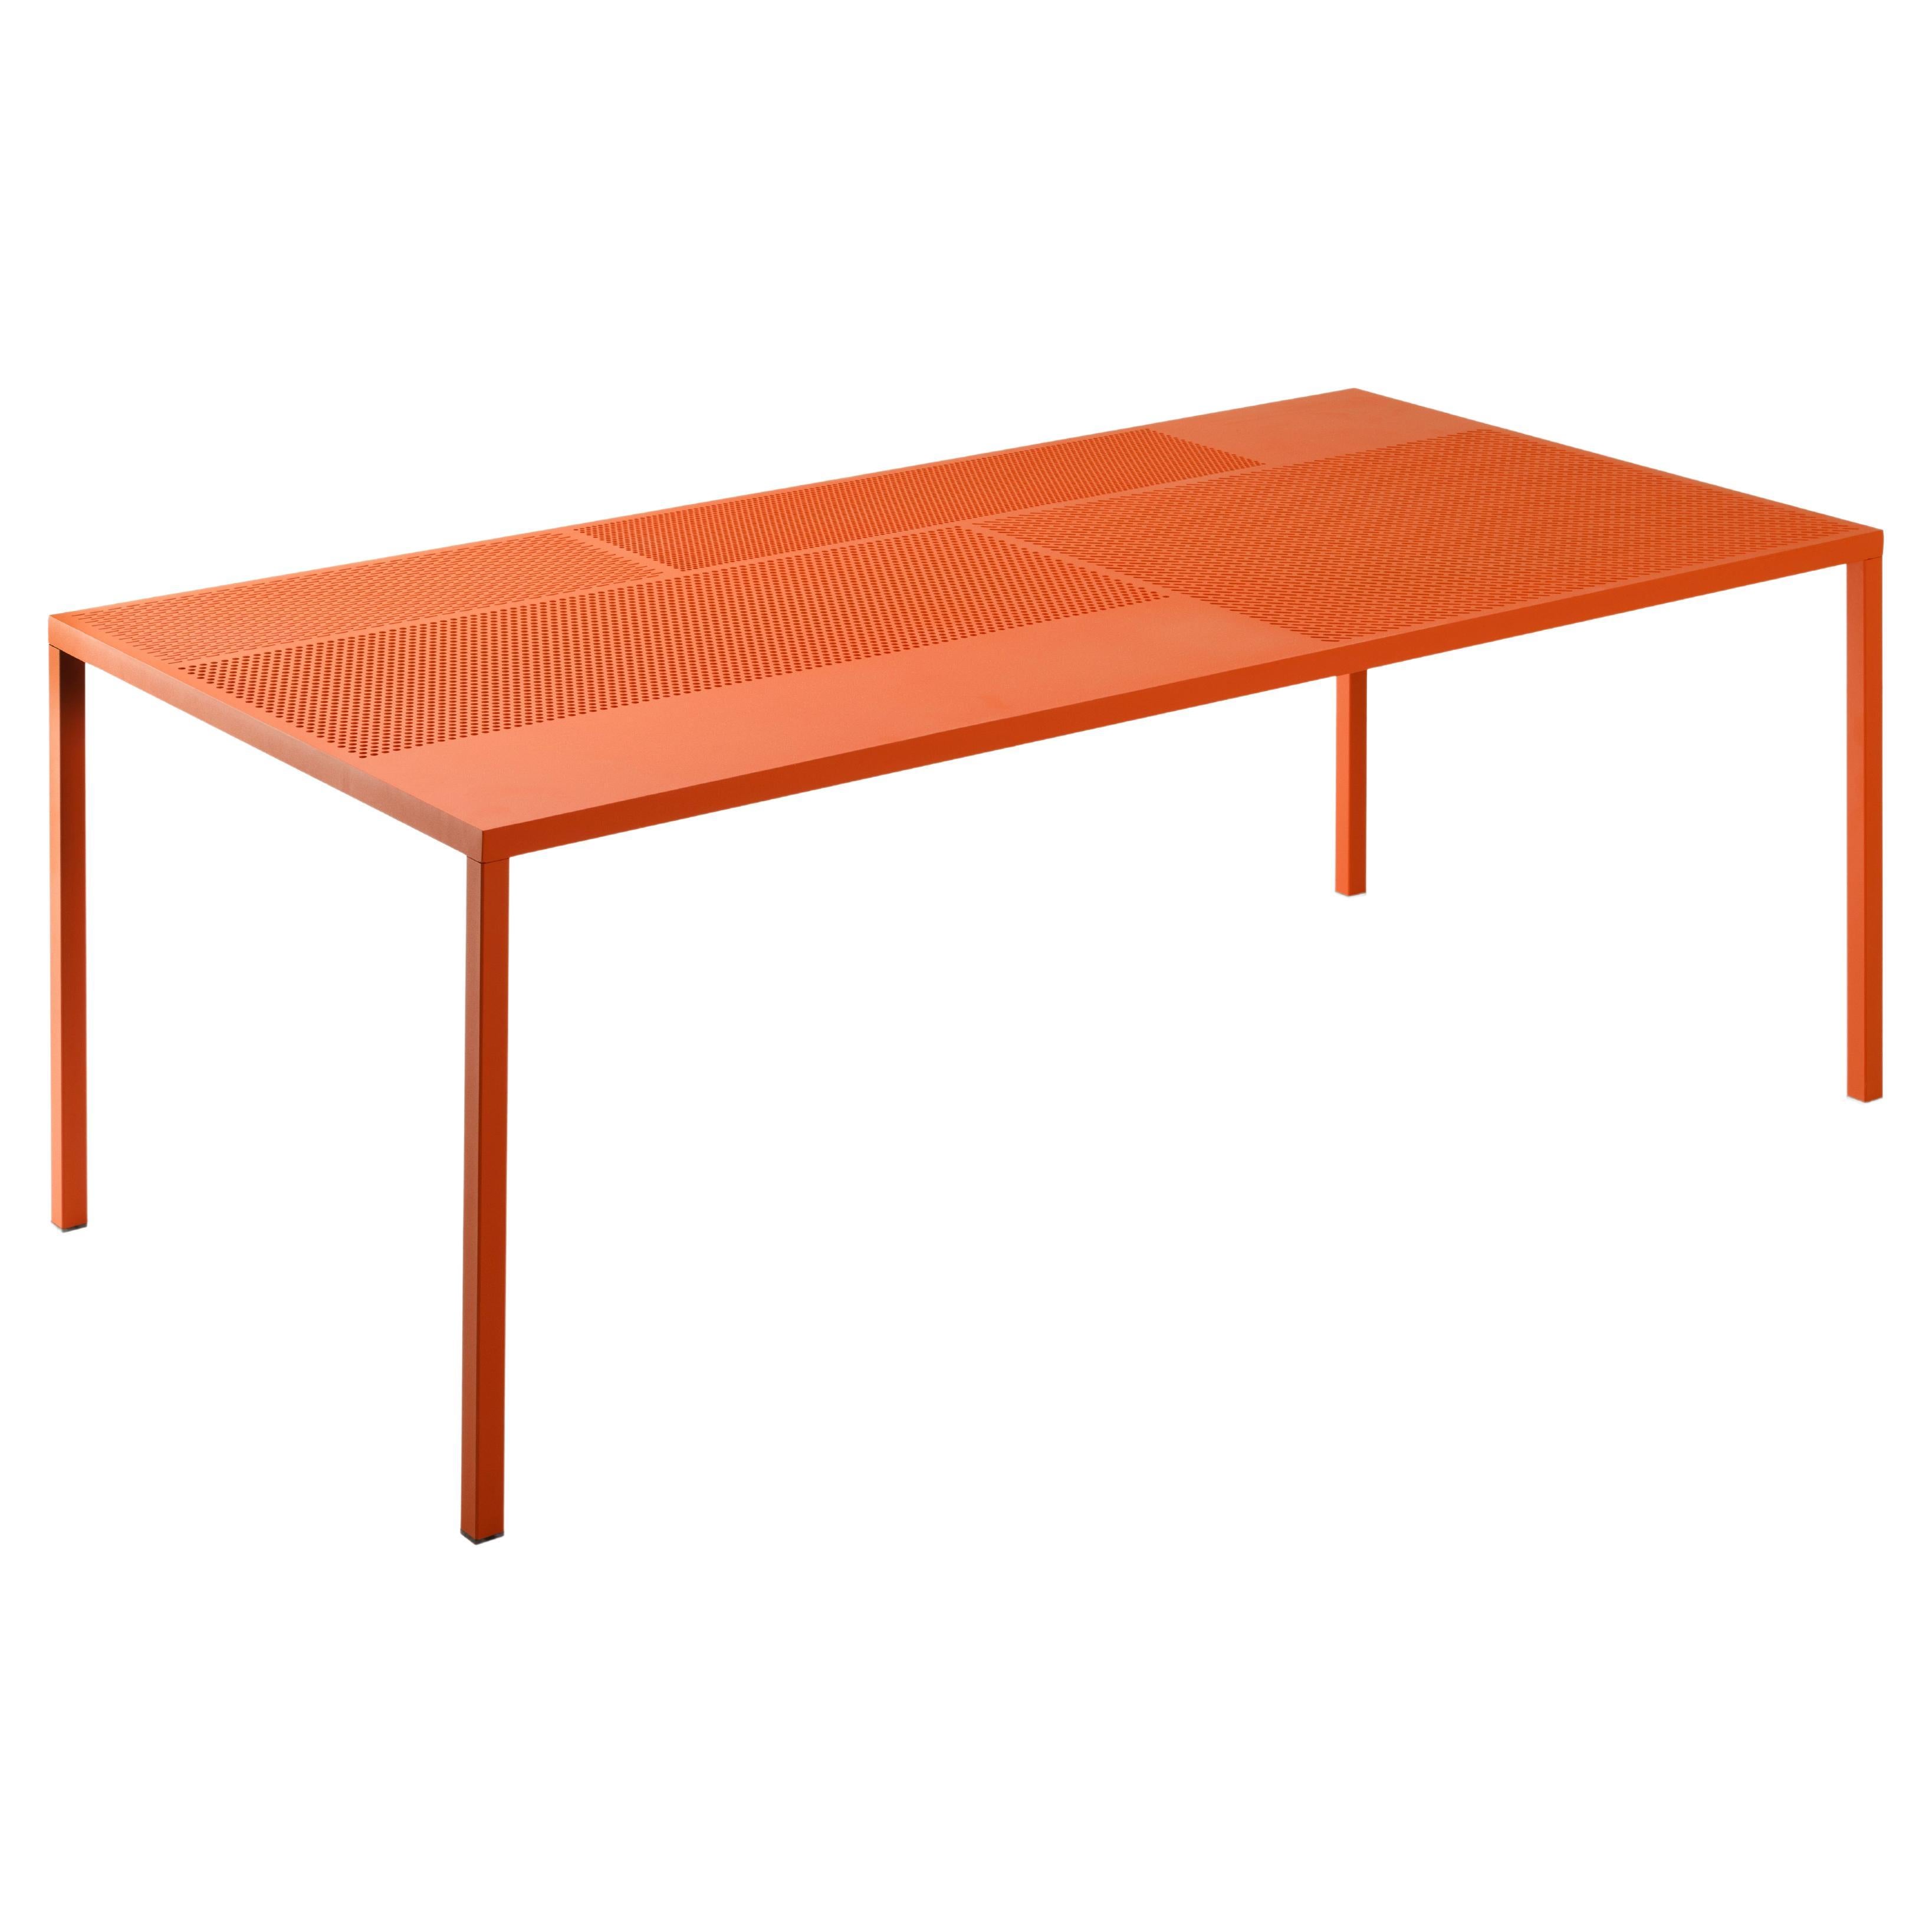 21st Century Modern Perforated Steel Rectangular Table Outdoor Neo Made in Italy For Sale